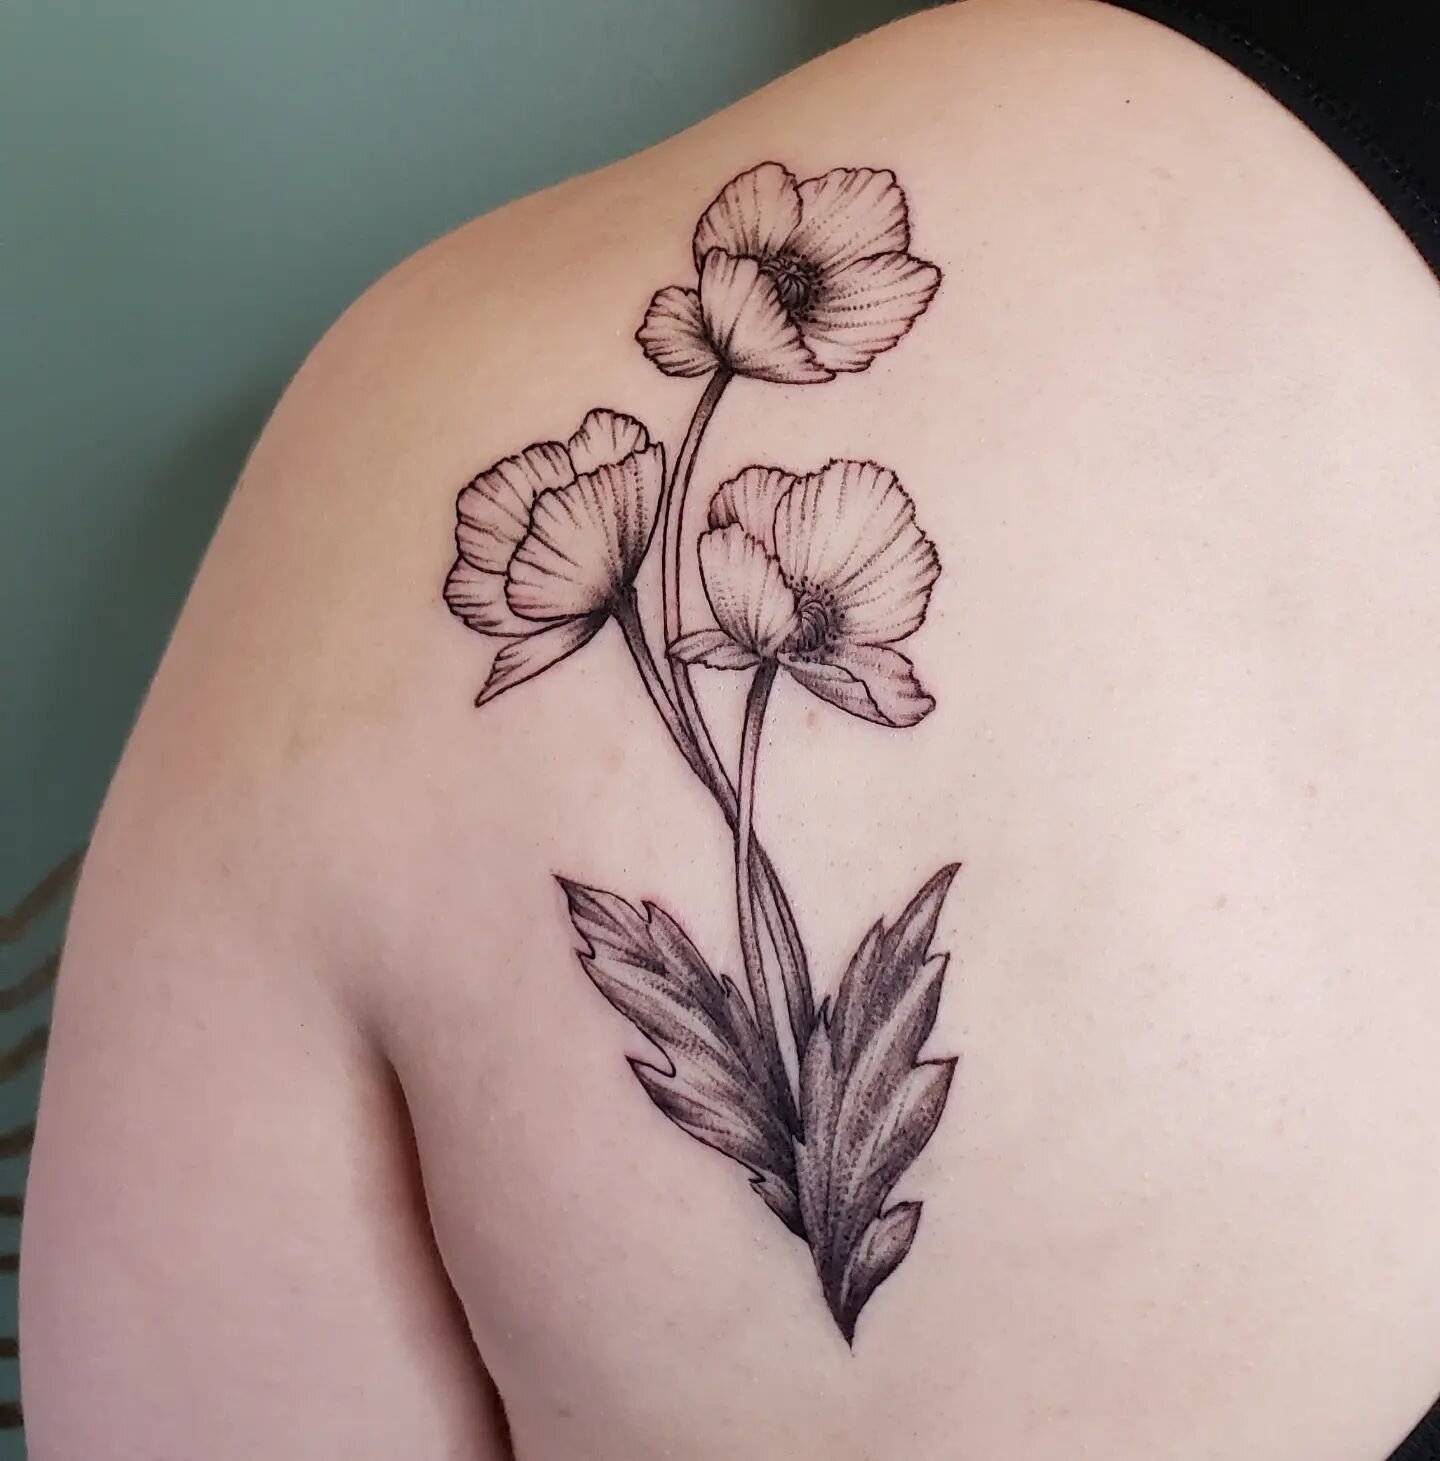 Custom Poppies, for Sarah 🖤
.
.
I&rsquo;m at @jadeanddaggertattoo just off 17th Ave. Email spinster.tattoo@gmail.com with your tattoo hopes &amp; dreams ♡
.
.
.
.
.
.
.
#PoppyTattoo #poppies #Tattoo&nbsp; #IllustrativeTattoo #CustomTattoo&nbsp; #Bla